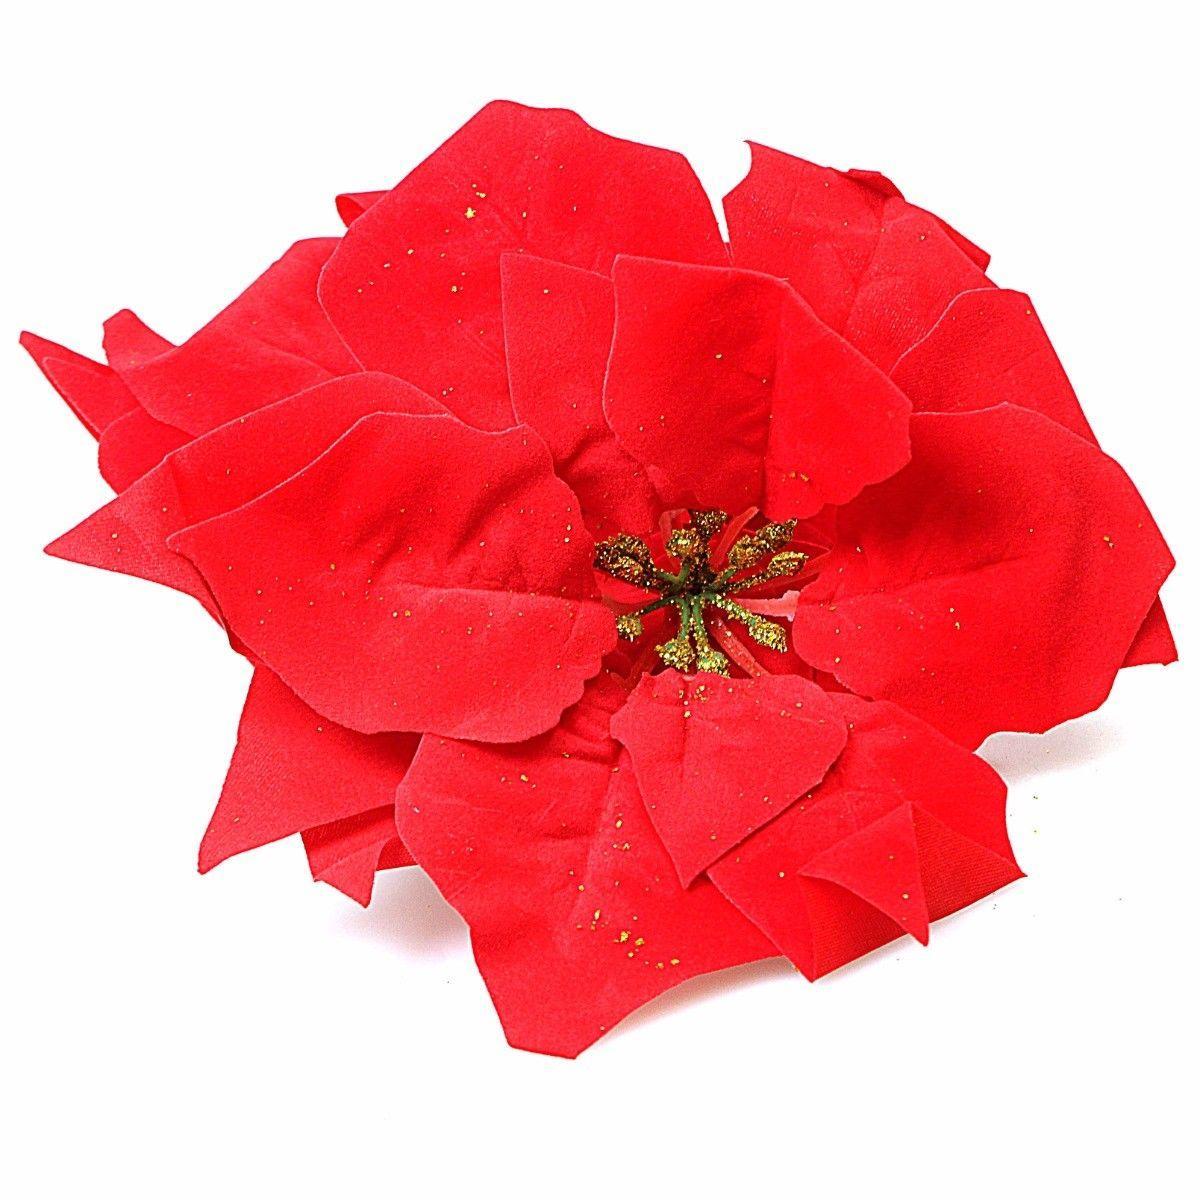 Red Floral Poinsetta Novelty Christmas Party Household Decor 2 Pack 1239 (Parcel Rate)